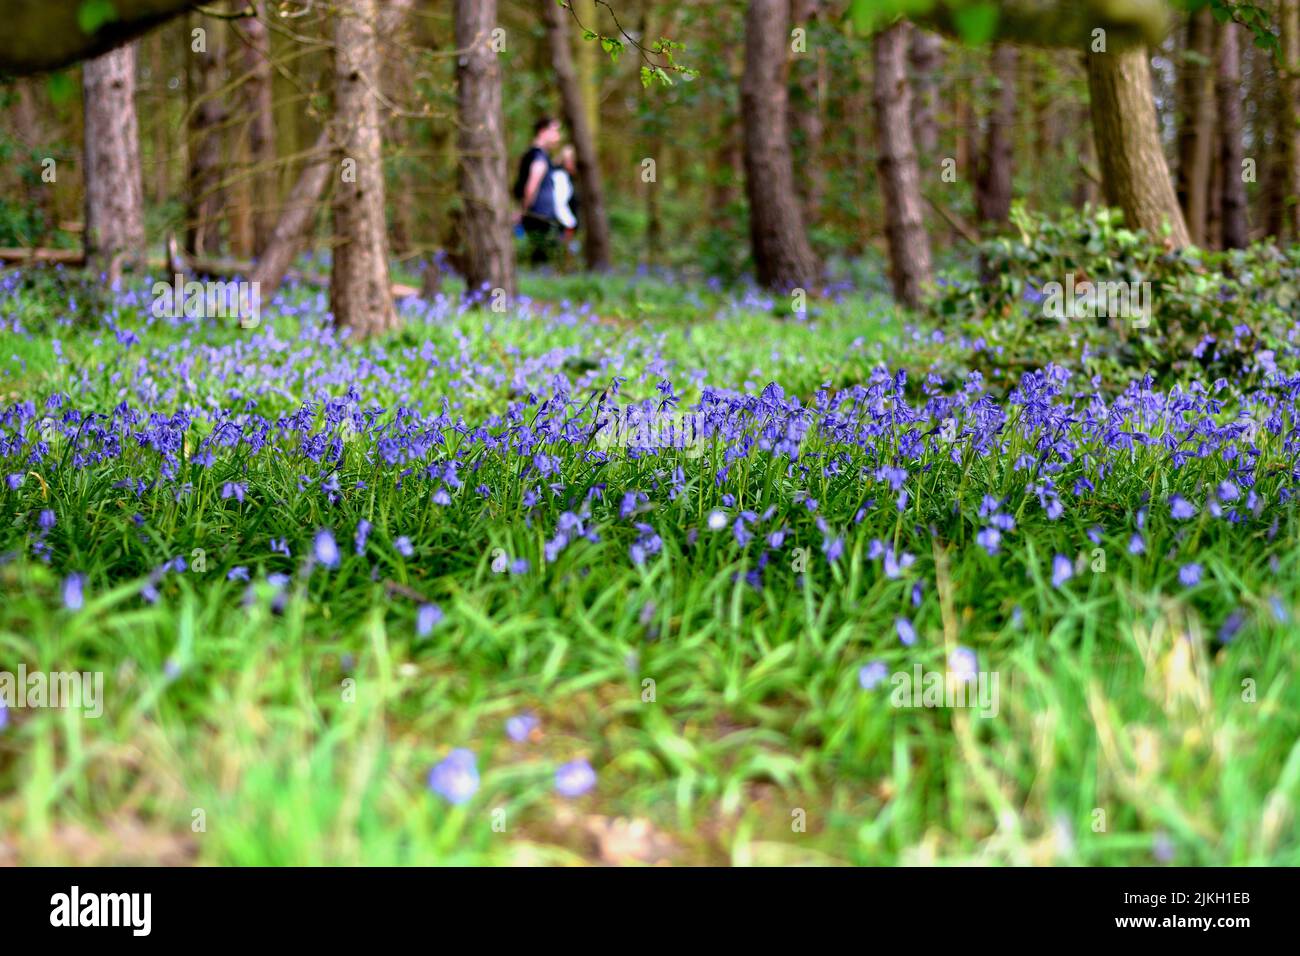 A selective focus shot of common bluebells (Hyacinthoides non-scripta) with passers-by in the distance Stock Photo